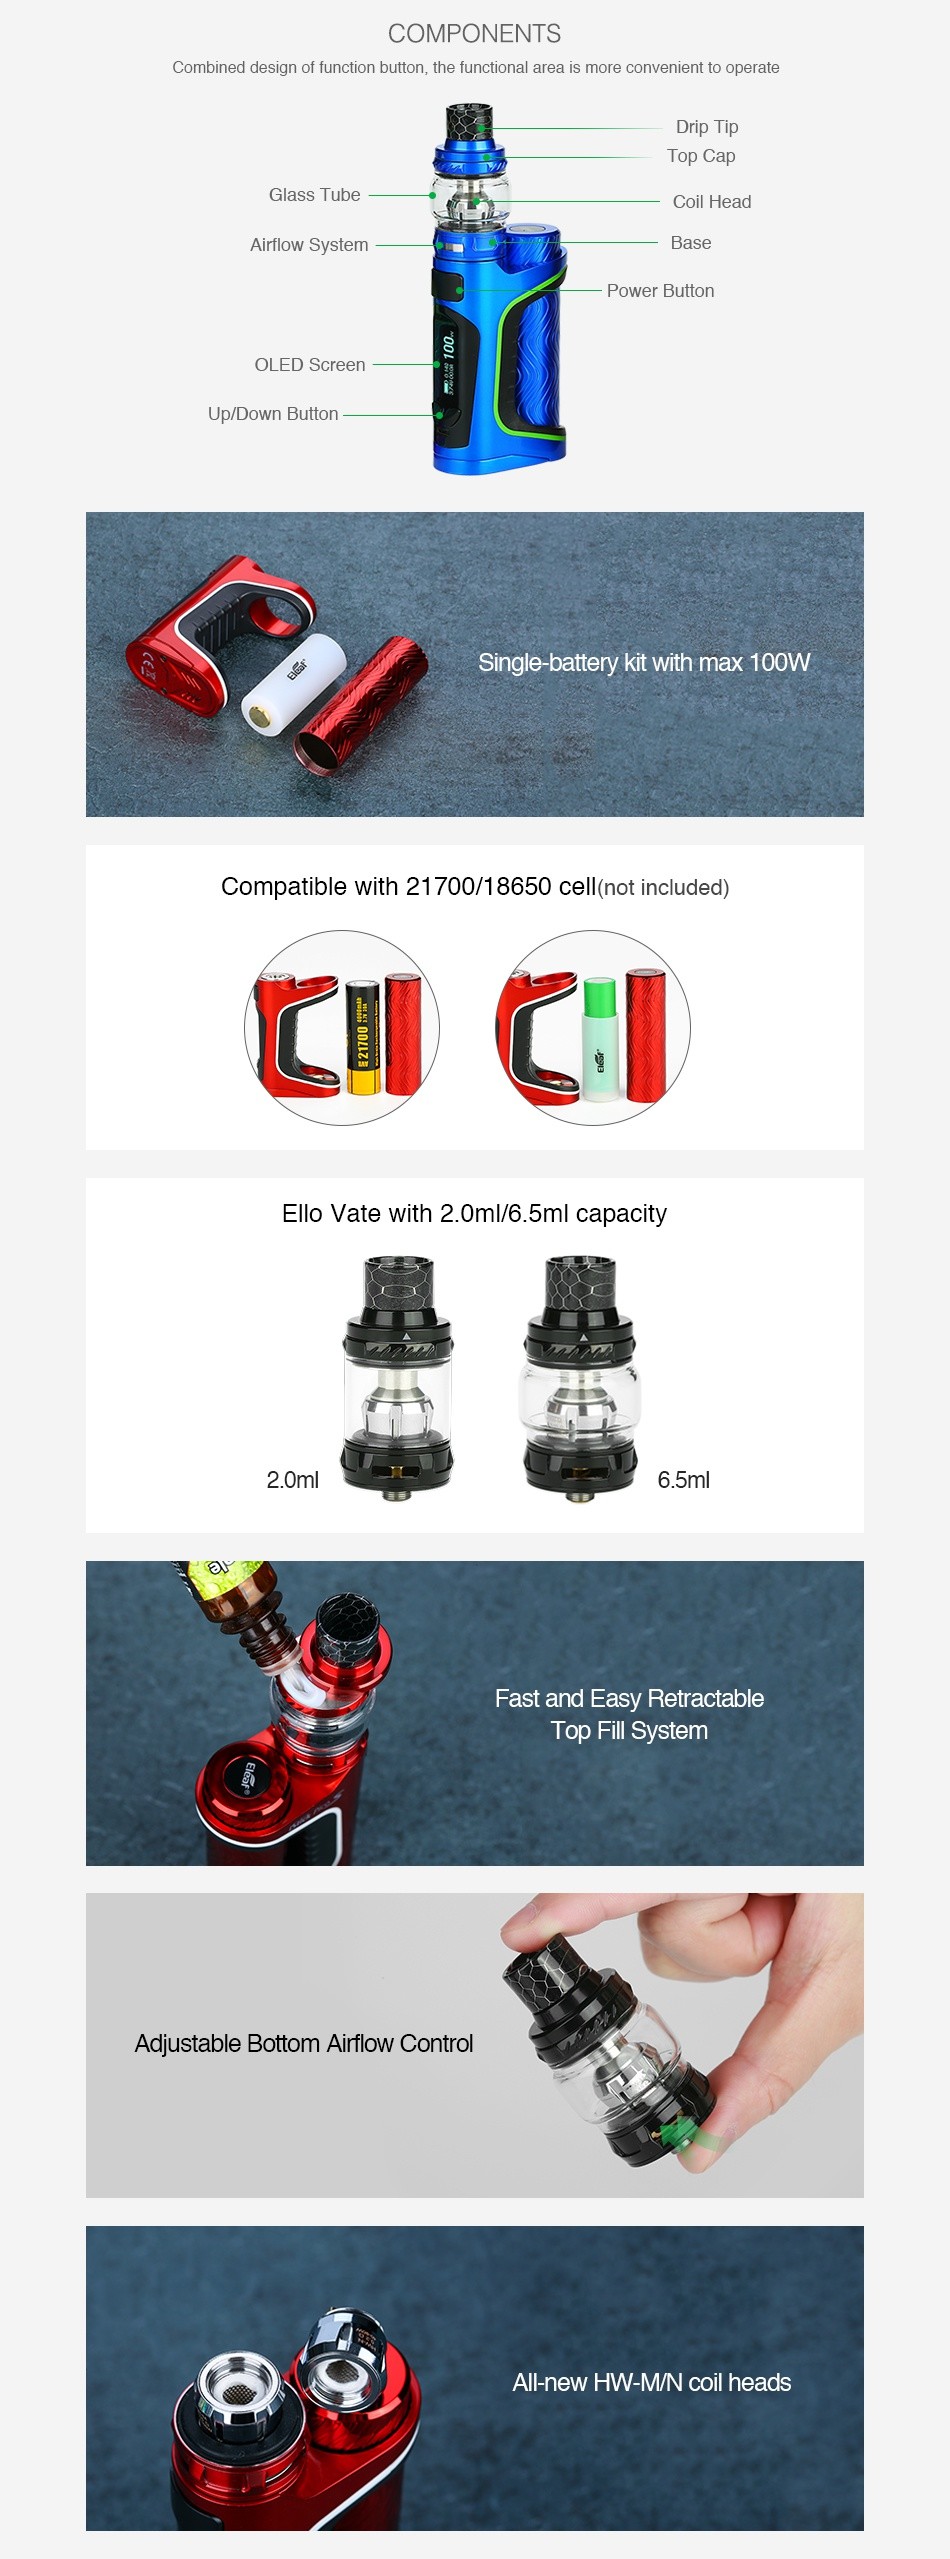 Eleaf iStick Pico S 100W TC Kit COMPONENTS Combined design of function button  the functional area is more convenient to operate Drip I ip Ss Coil I lead Airflow Systcm Power Button Ol FD Scrccn Up Down Bullon Single battery kit with max 100W Compatible with 21700 18650 cell not included  Ello vate with 2 0m 6 5ml capacity 2 0ml 6 5ml Fast and Easy Retractable Iop Fll System Adjustable Bottom Airflow Control All new HW mn coil heads